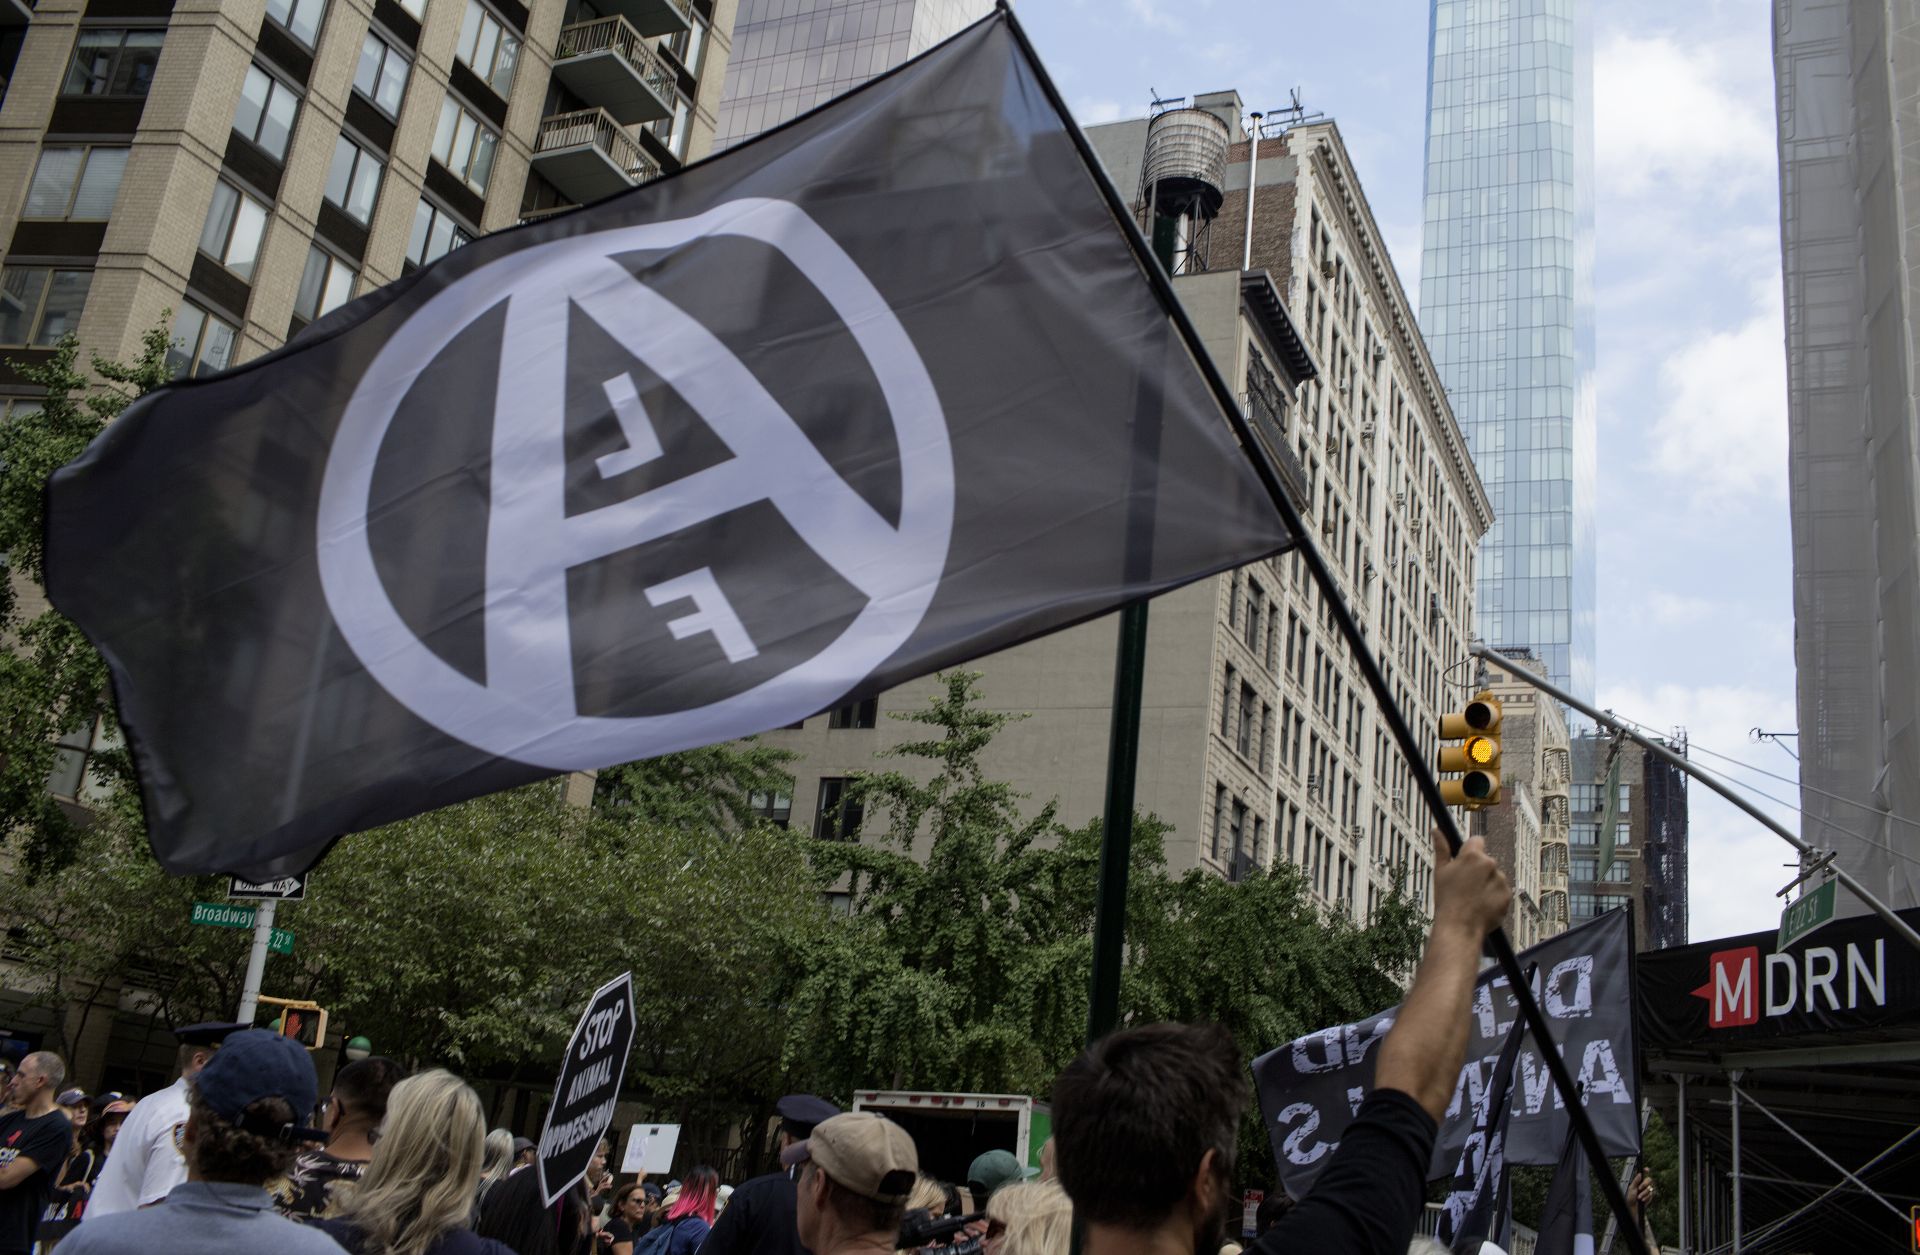 Animal rights activists participate in the annual Animal Rights March in New York City.